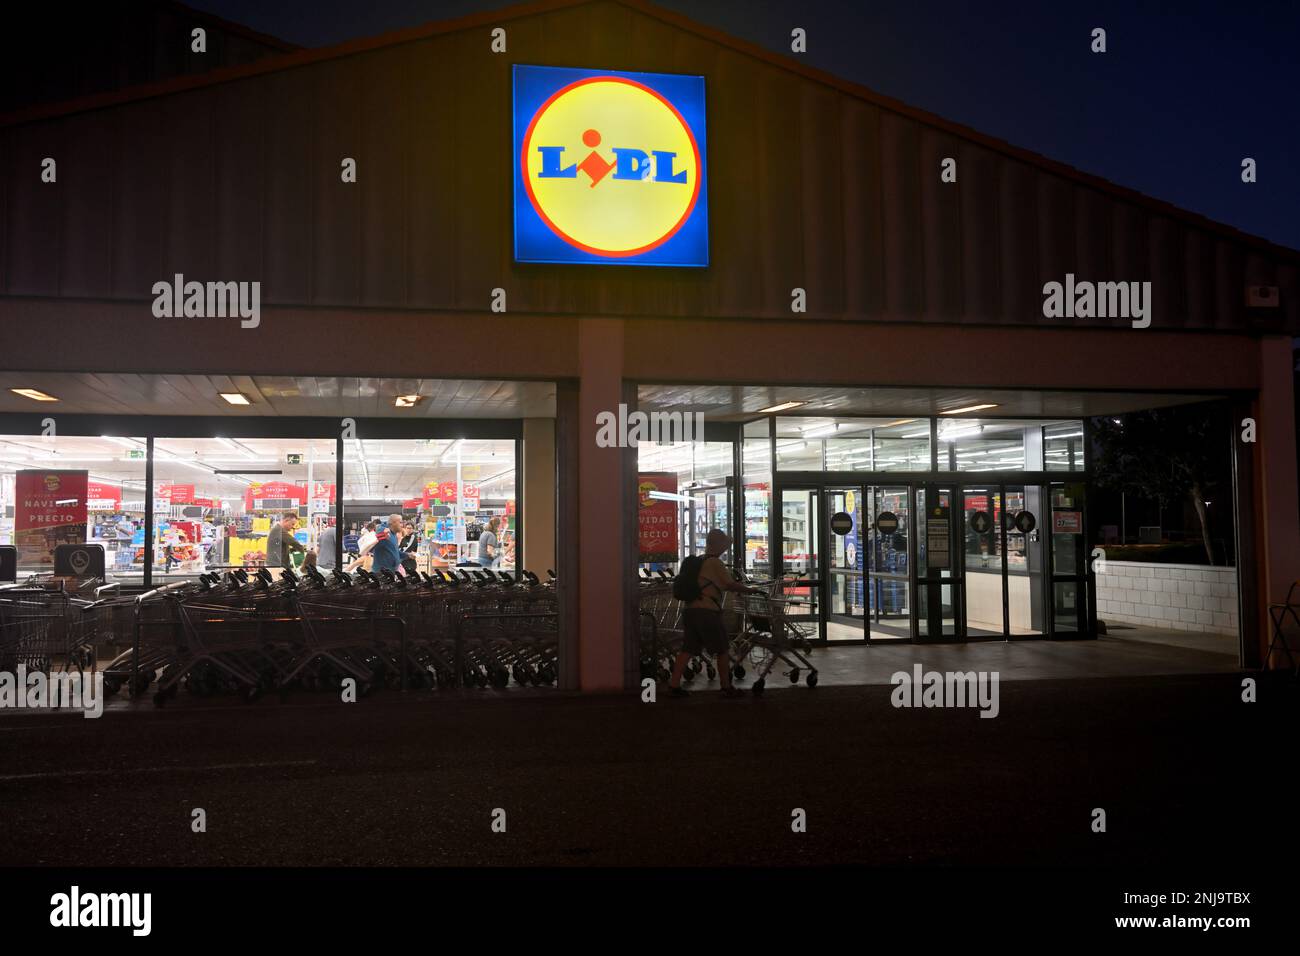 Outside a Lidl retail store at night with inside lit up and silhouettes of trolleys and customer outside Stock Photo